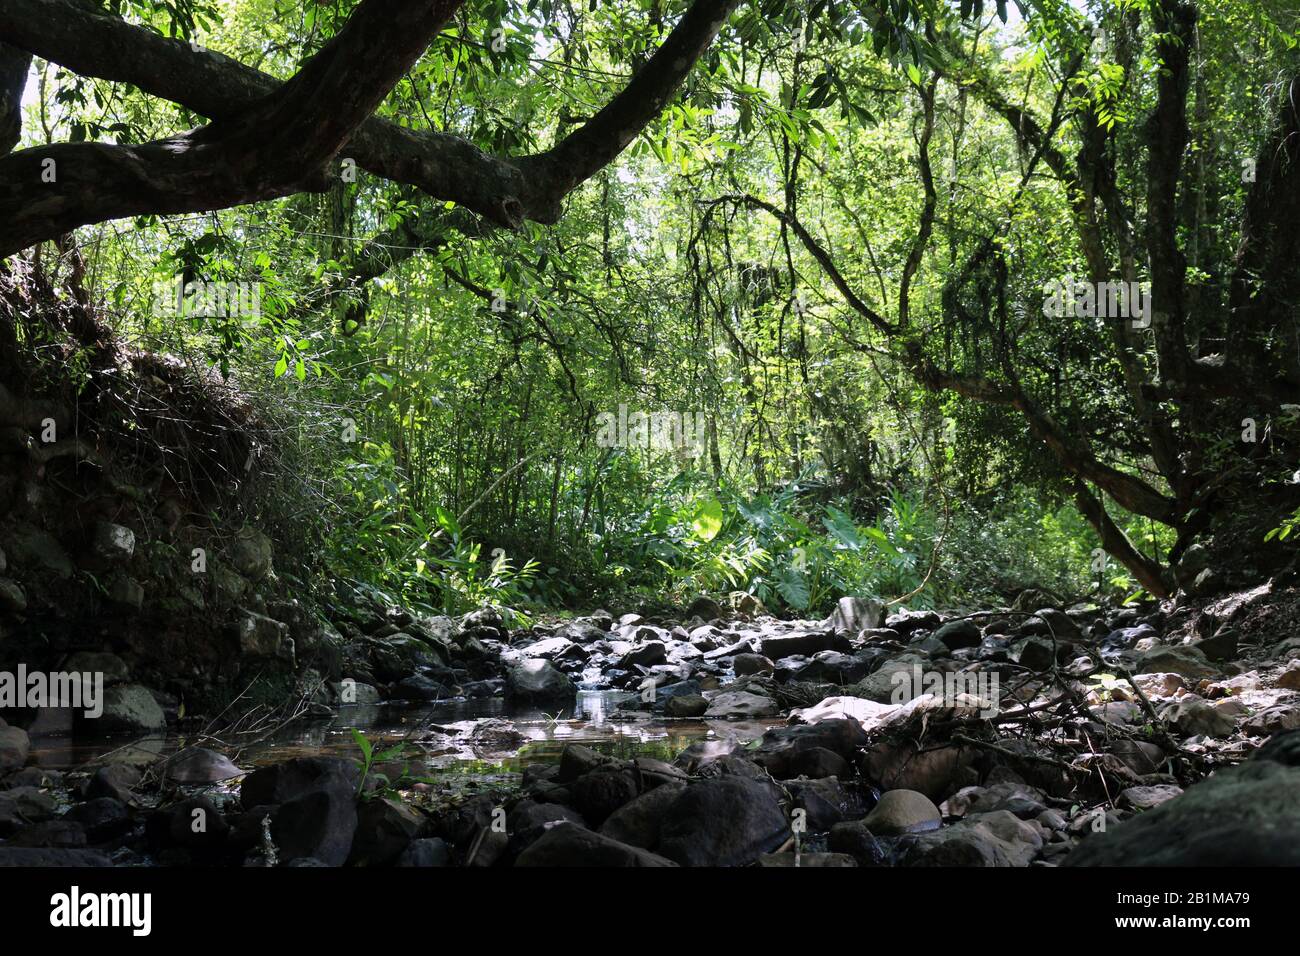 A small stream among the vegetation. Brazil has charms and beautiful corners amid nature. Stock Photo